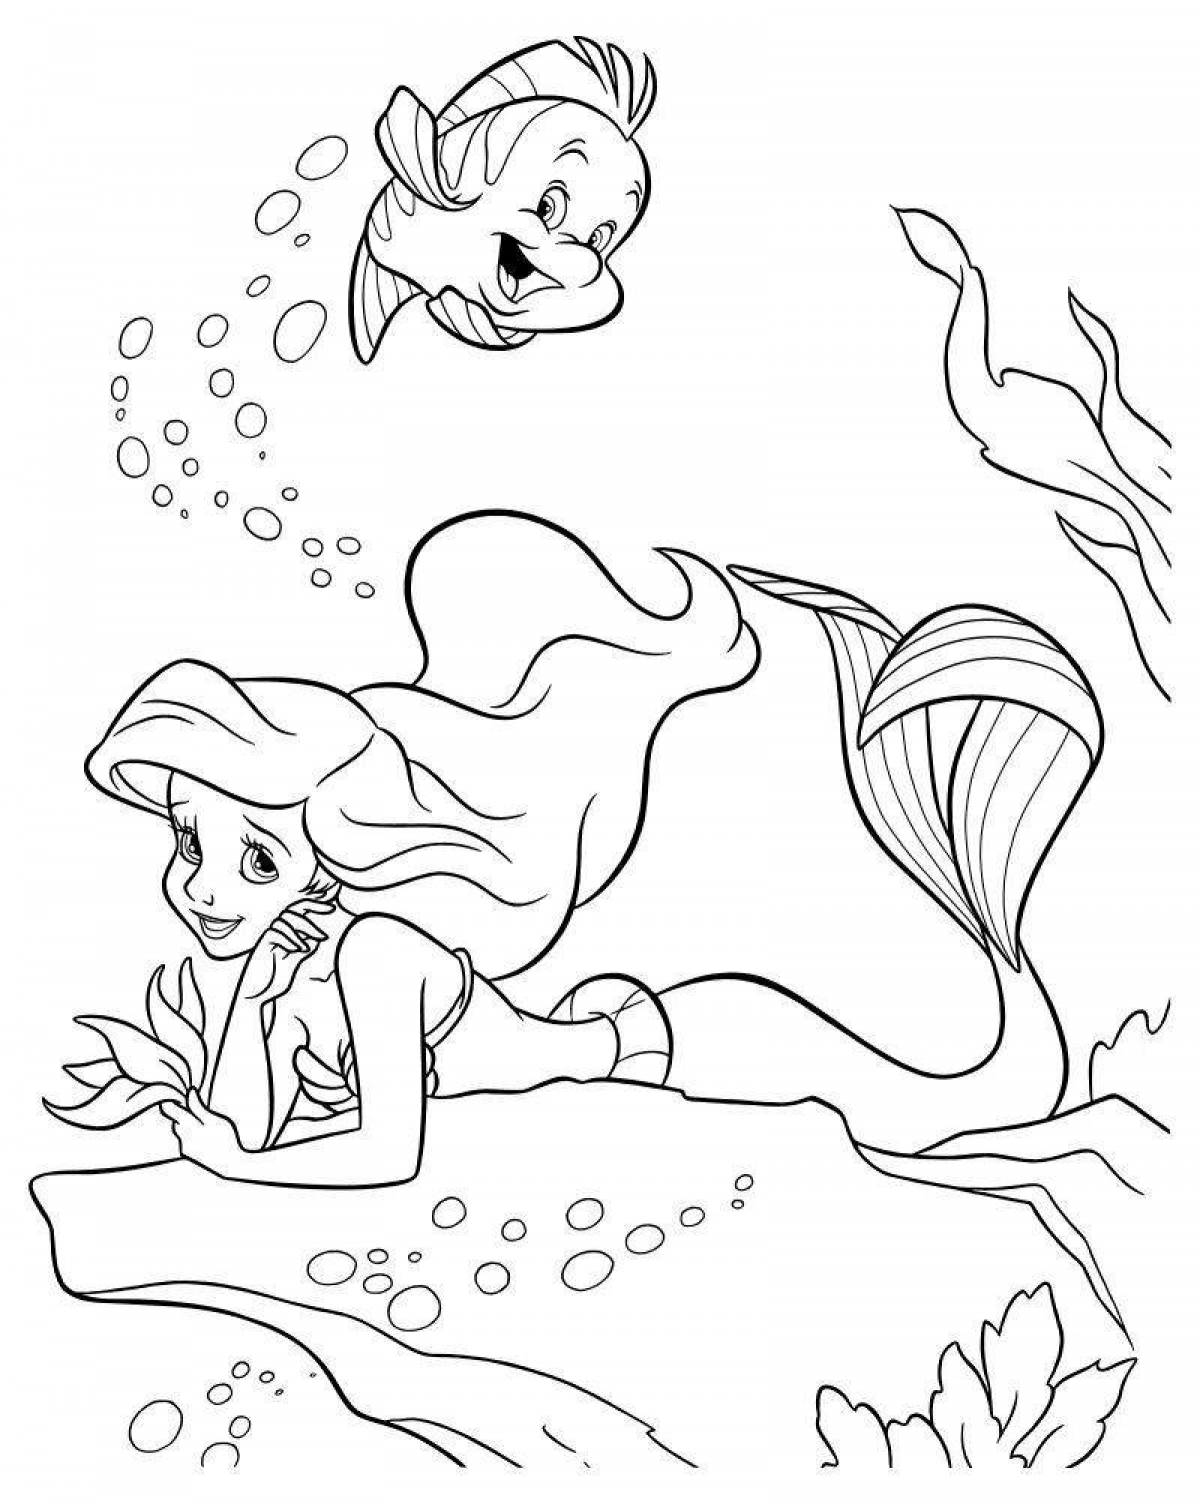 Coloring book shining little mermaid